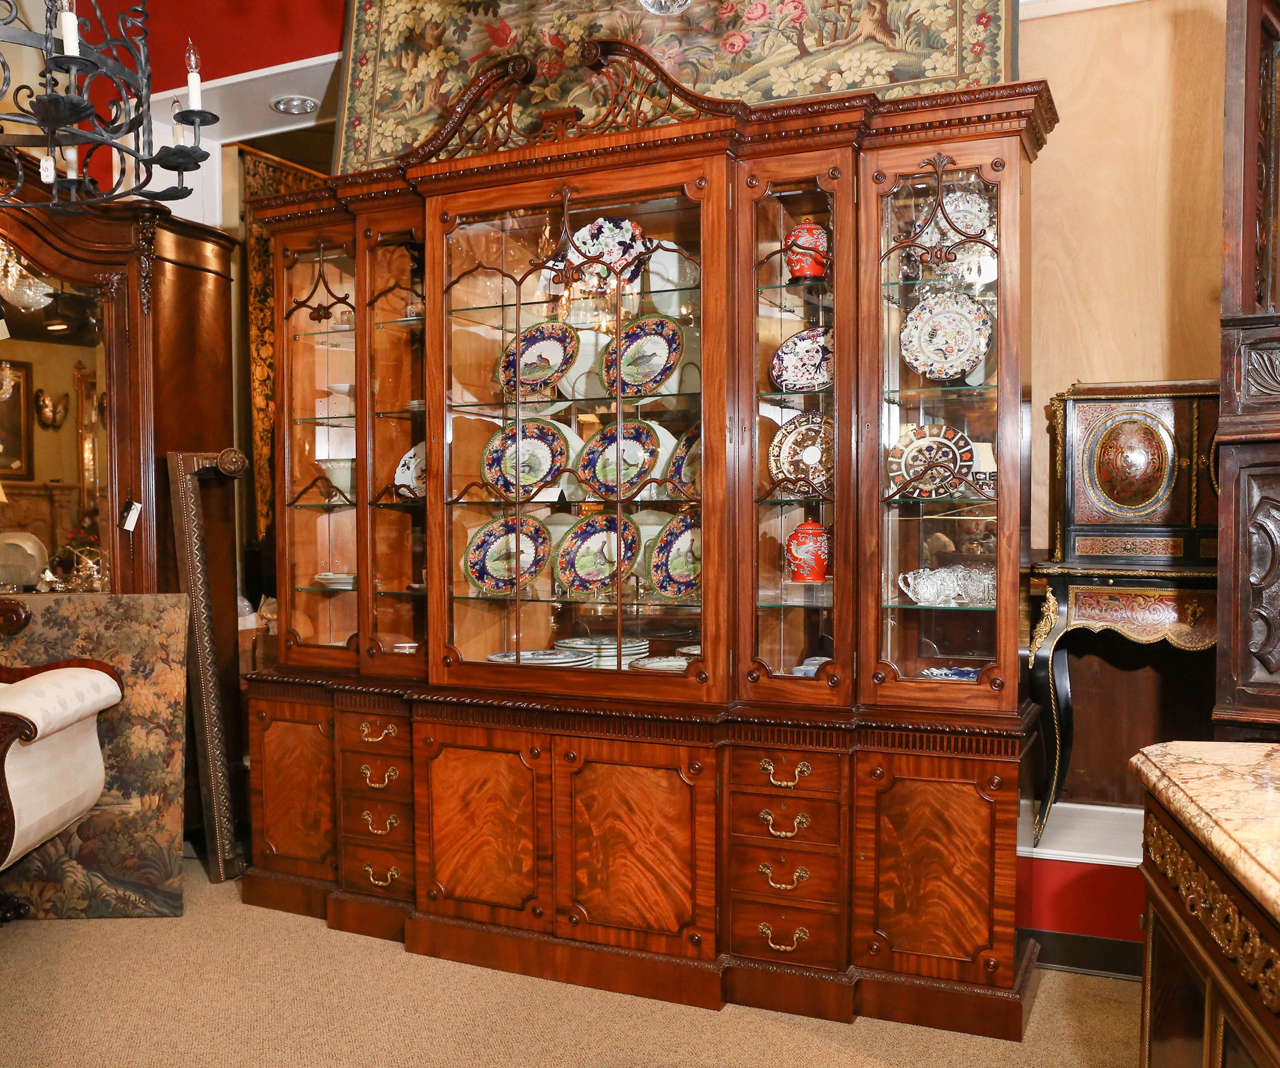 Chinese Chippendale style display cabinet,
20th century.
Flame mahogany.
Adjustable shelves.
Lighted
label 